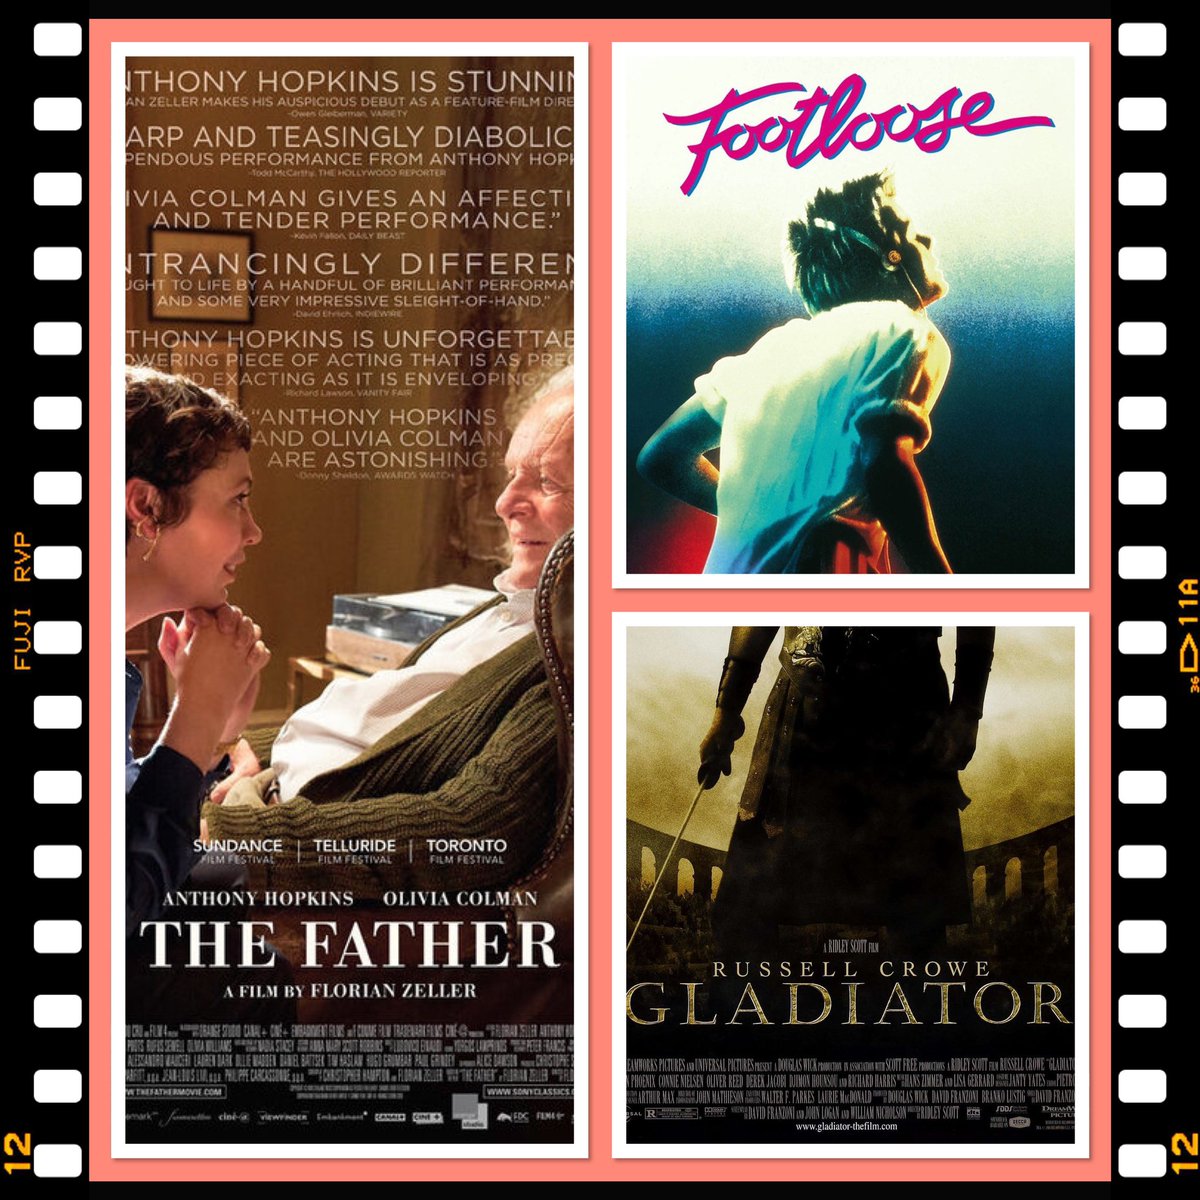 Episode 147: The Father (2020)
Join us back in the studio (shed) together for the first time in months!
We play a promo from @FilmBustersPOD and have all the usual sections in there too! 
Please listen/like/share! #filmtwitter 

podcasts.apple.com/gb/podcast/mov…